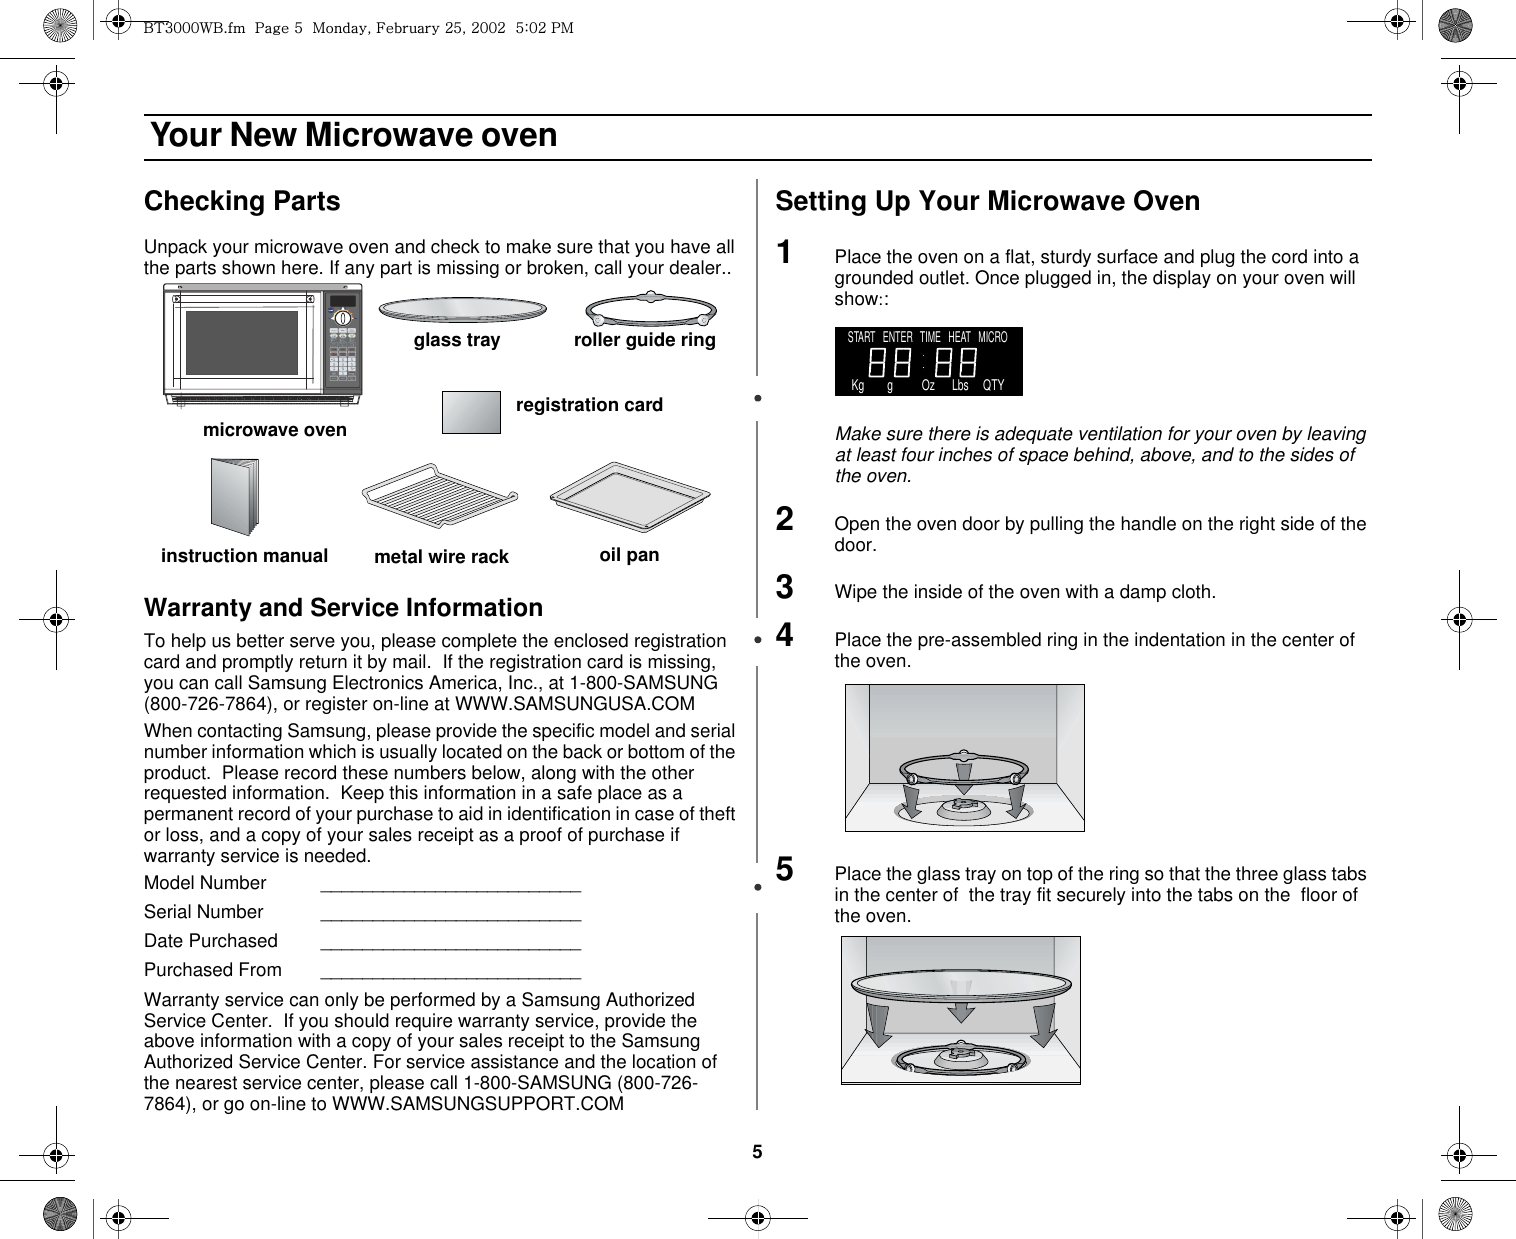 5 Your New Microwave ovenChecking PartsUnpack your microwave oven and check to make sure that you have all the parts shown here. If any part is missing or broken, call your dealer..Warranty and Service InformationTo help us better serve you, please complete the enclosed registration card and promptly return it by mail.  If the registration card is missing, you can call Samsung Electronics America, Inc., at 1-800-SAMSUNG (800-726-7864), or register on-line at WWW.SAMSUNGUSA.COMWhen contacting Samsung, please provide the specific model and serial number information which is usually located on the back or bottom of the product.  Please record these numbers below, along with the other requested information.  Keep this information in a safe place as a permanent record of your purchase to aid in identification in case of theft or loss, and a copy of your sales receipt as a proof of purchase if warranty service is needed.Model Number    _________________________Serial Number _________________________Date Purchased _________________________Purchased From _________________________Warranty service can only be performed by a Samsung Authorized Service Center.  If you should require warranty service, provide the above information with a copy of your sales receipt to the Samsung Authorized Service Center. For service assistance and the location of the nearest service center, please call 1-800-SAMSUNG (800-726-7864), or go on-line to WWW.SAMSUNGSUPPORT.COMSetting Up Your Microwave Oven1Place the oven on a flat, sturdy surface and plug the cord into a grounded outlet. Once plugged in, the display on your oven will show::Make sure there is adequate ventilation for your oven by leaving at least four inches of space behind, above, and to the sides of the oven. 2Open the oven door by pulling the handle on the right side of the door.3Wipe the inside of the oven with a damp cloth.4Place the pre-assembled ring in the indentation in the center of the oven.5Place the glass tray on top of the ring so that the three glass tabs in the center of  the tray fit securely into the tabs on the  floor of the oven.microwave ovenglass tray roller guide ring metal wire rack oil paninstruction manualregistration cardSTART   ENTER   TIME   HEAT   MICRO    Kg        g          Oz      Lbs     QTYi{ZWWW~iUGGwG\GGtSGmGY\SGYWWYGG\aWYGwt